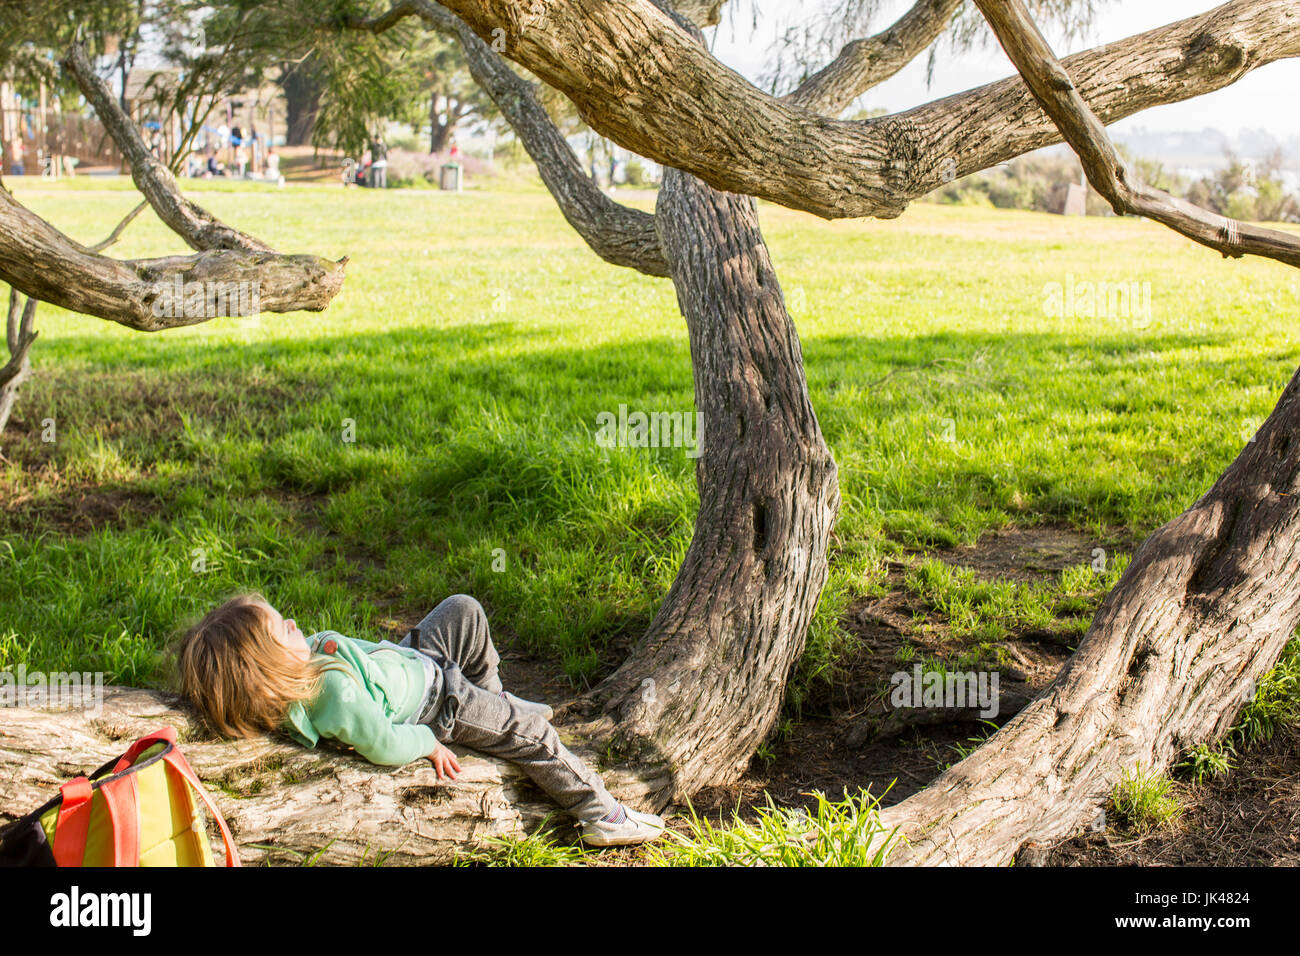 Caucasian girl laying on tree branch Banque D'Images